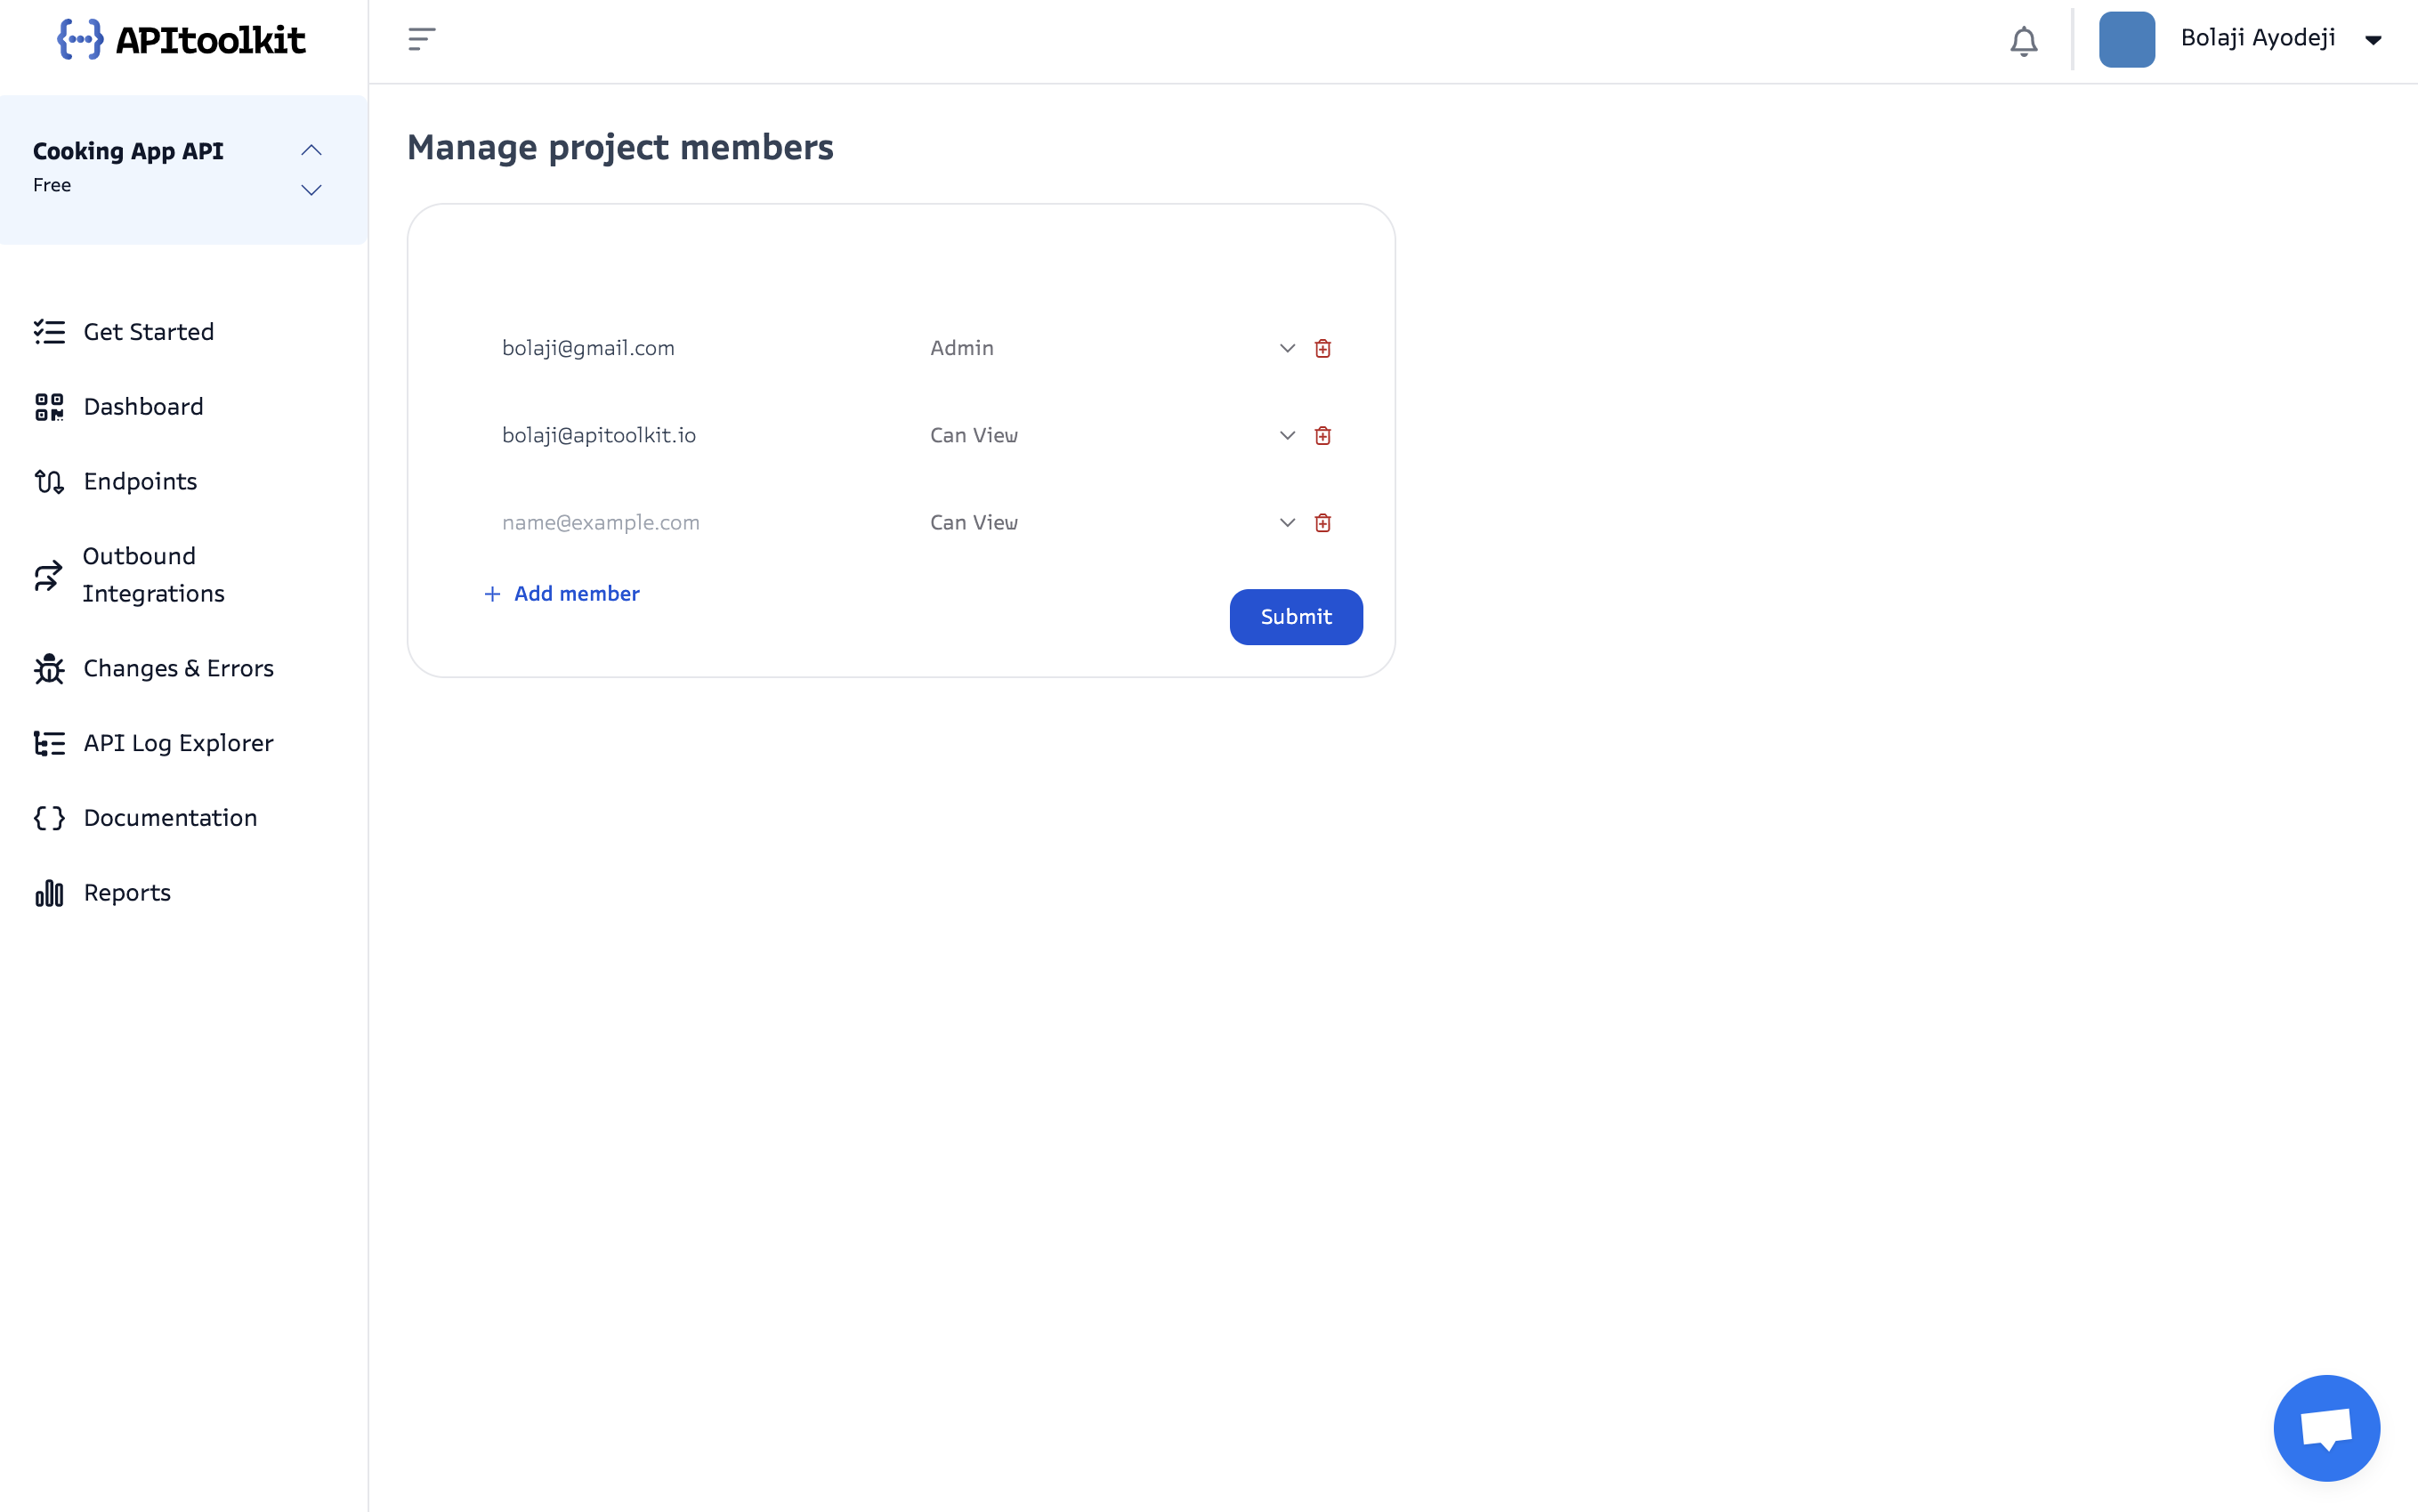 Screenshot of APItoolkit's manage members page